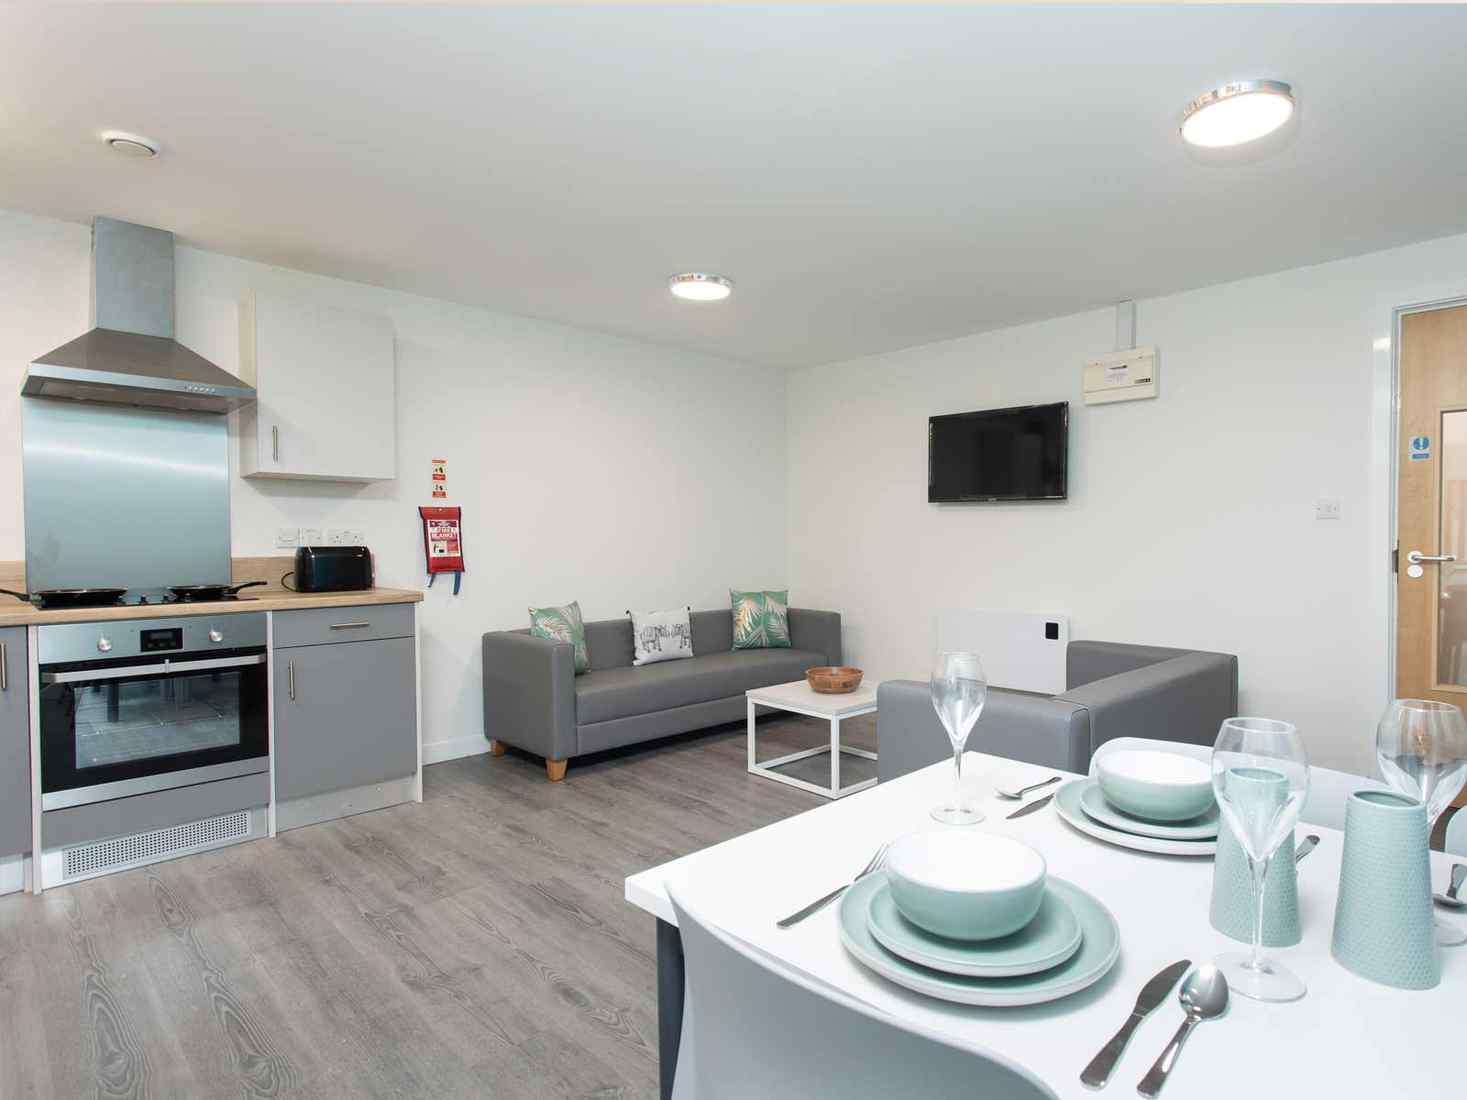 Shared kitchen and living area in Abode accommodation site, with oven, kitchen cupboards, two sofas with TV, and dining table. 